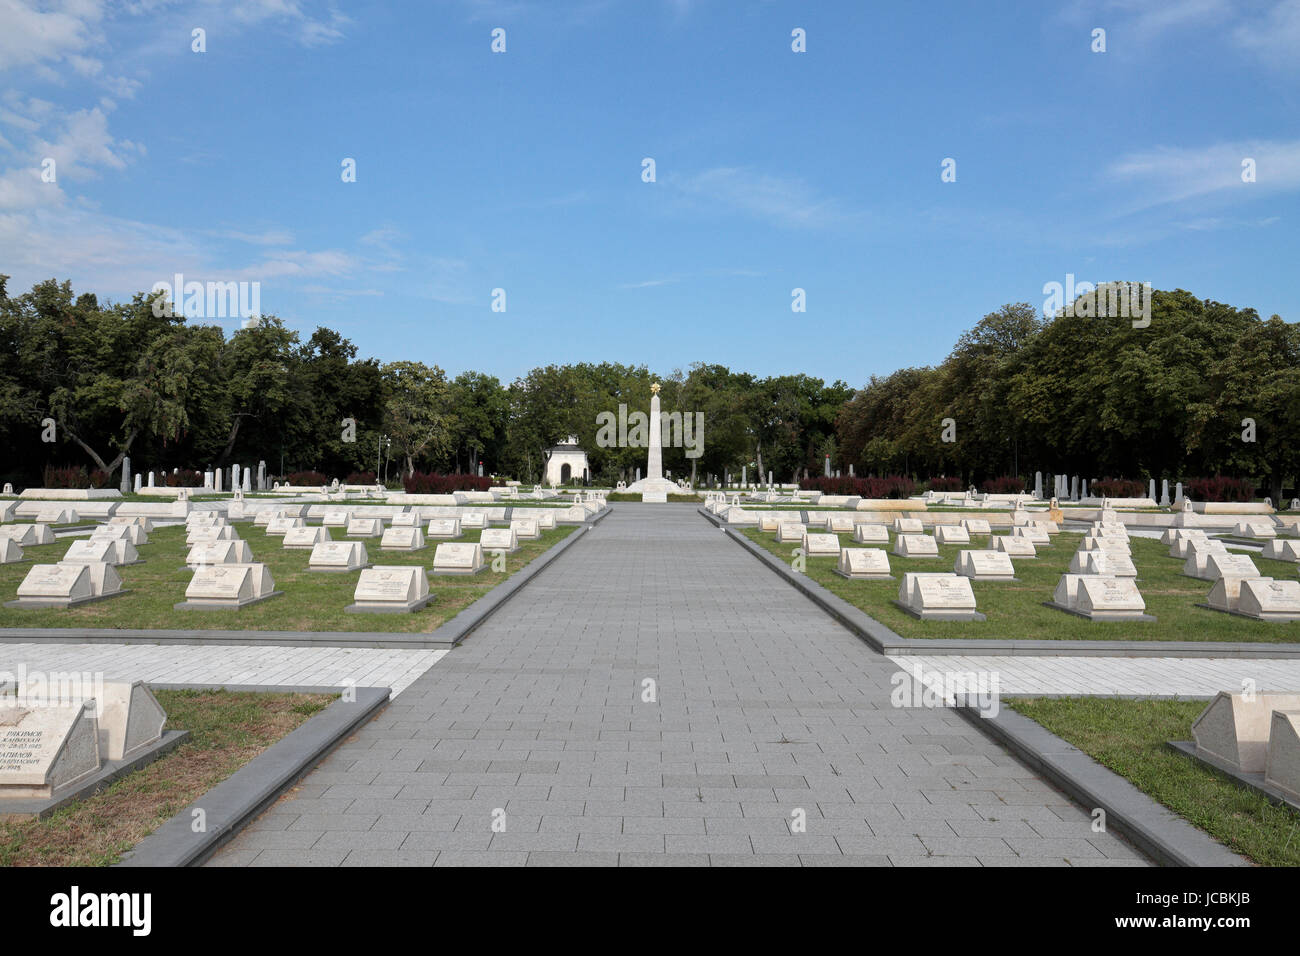 The military plot with Russian war graves from the Second World War in the Kerepesi Cemetery, Budapest, Hungary.  There are 489 soldiers and officers Stock Photo